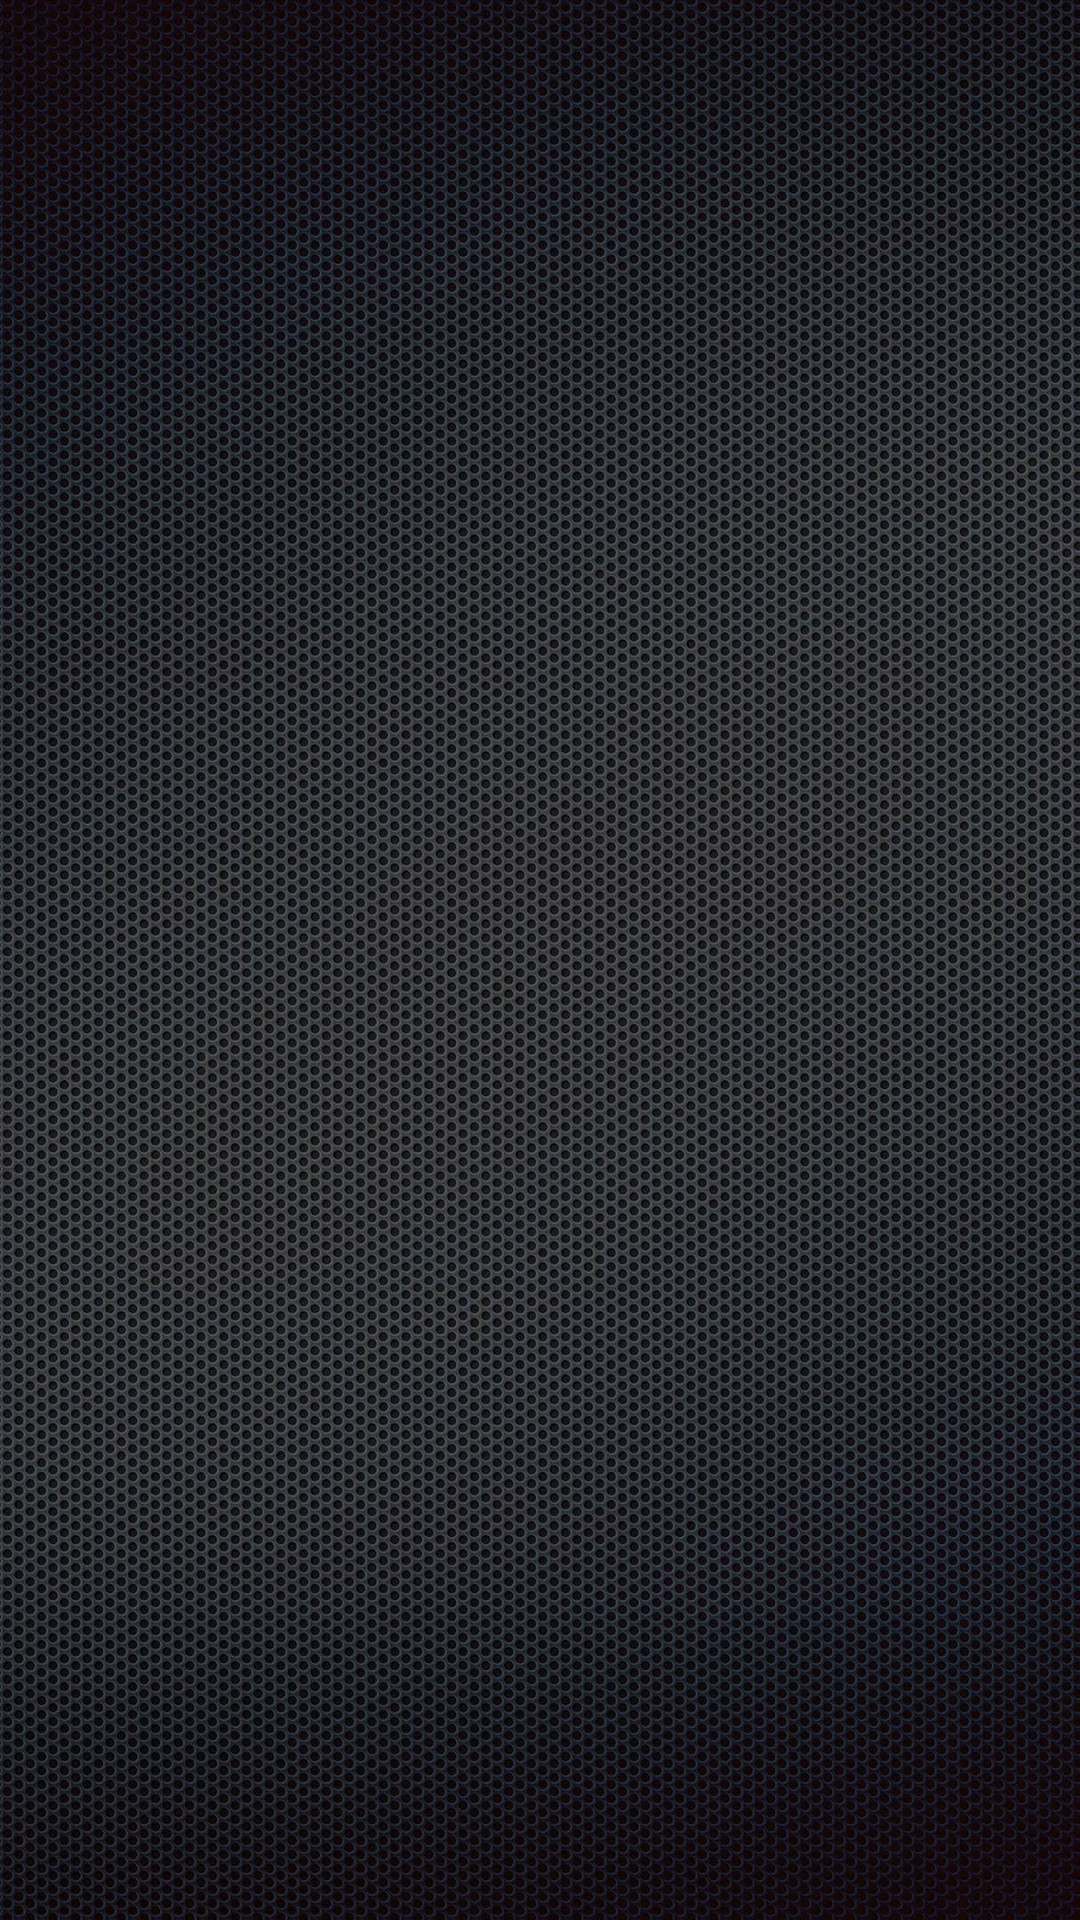 Black Grill Texture Wallpaper for SAMSUNG Galaxy Note 3